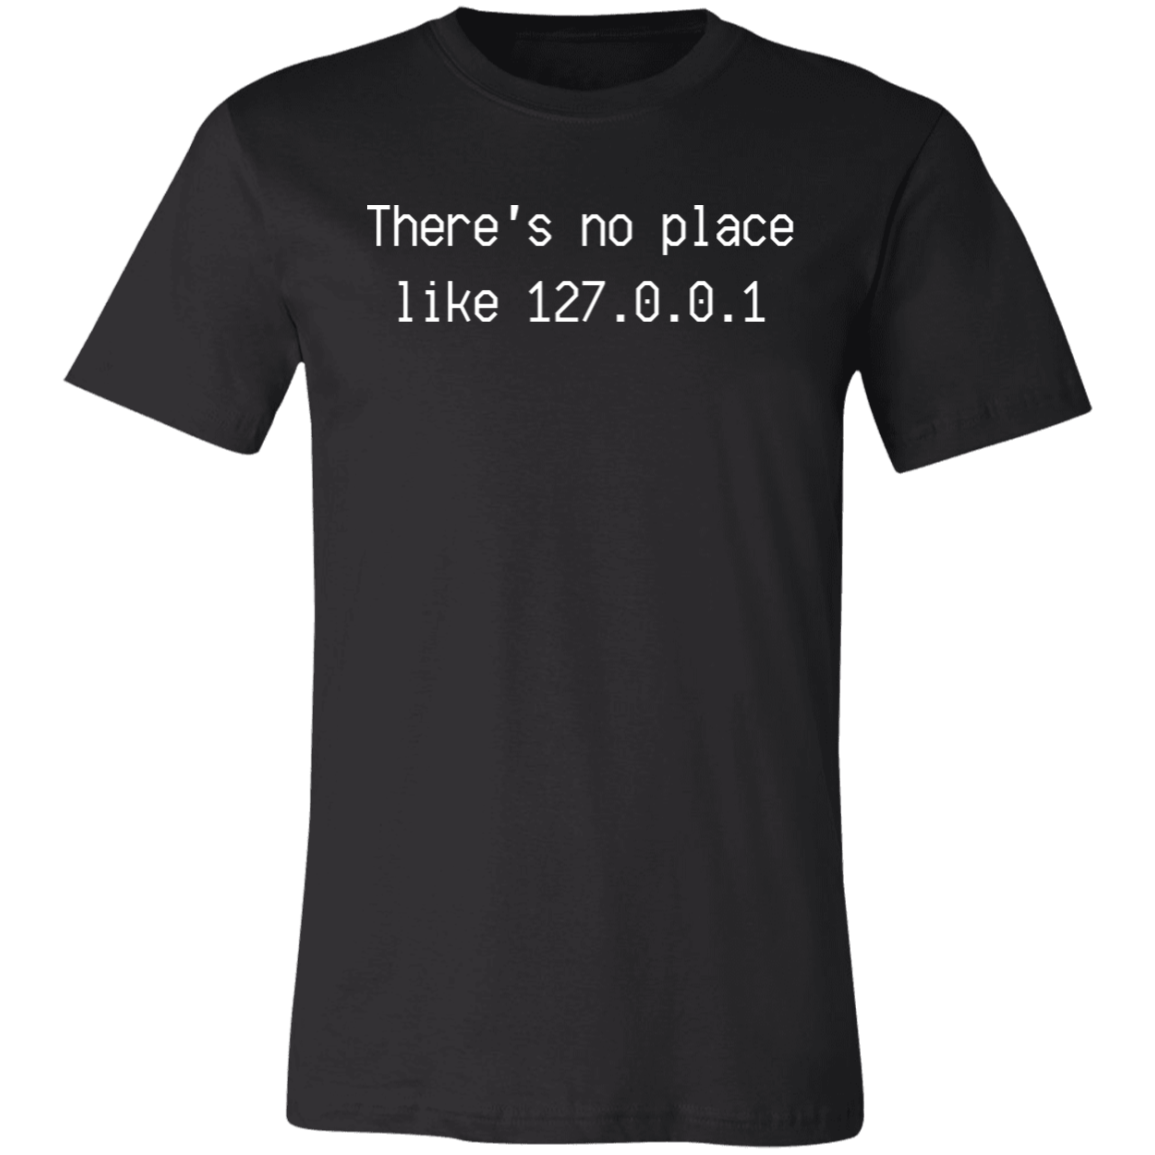 There's No Place Like 127.0.0.1 Short-Sleeve T-Shirt